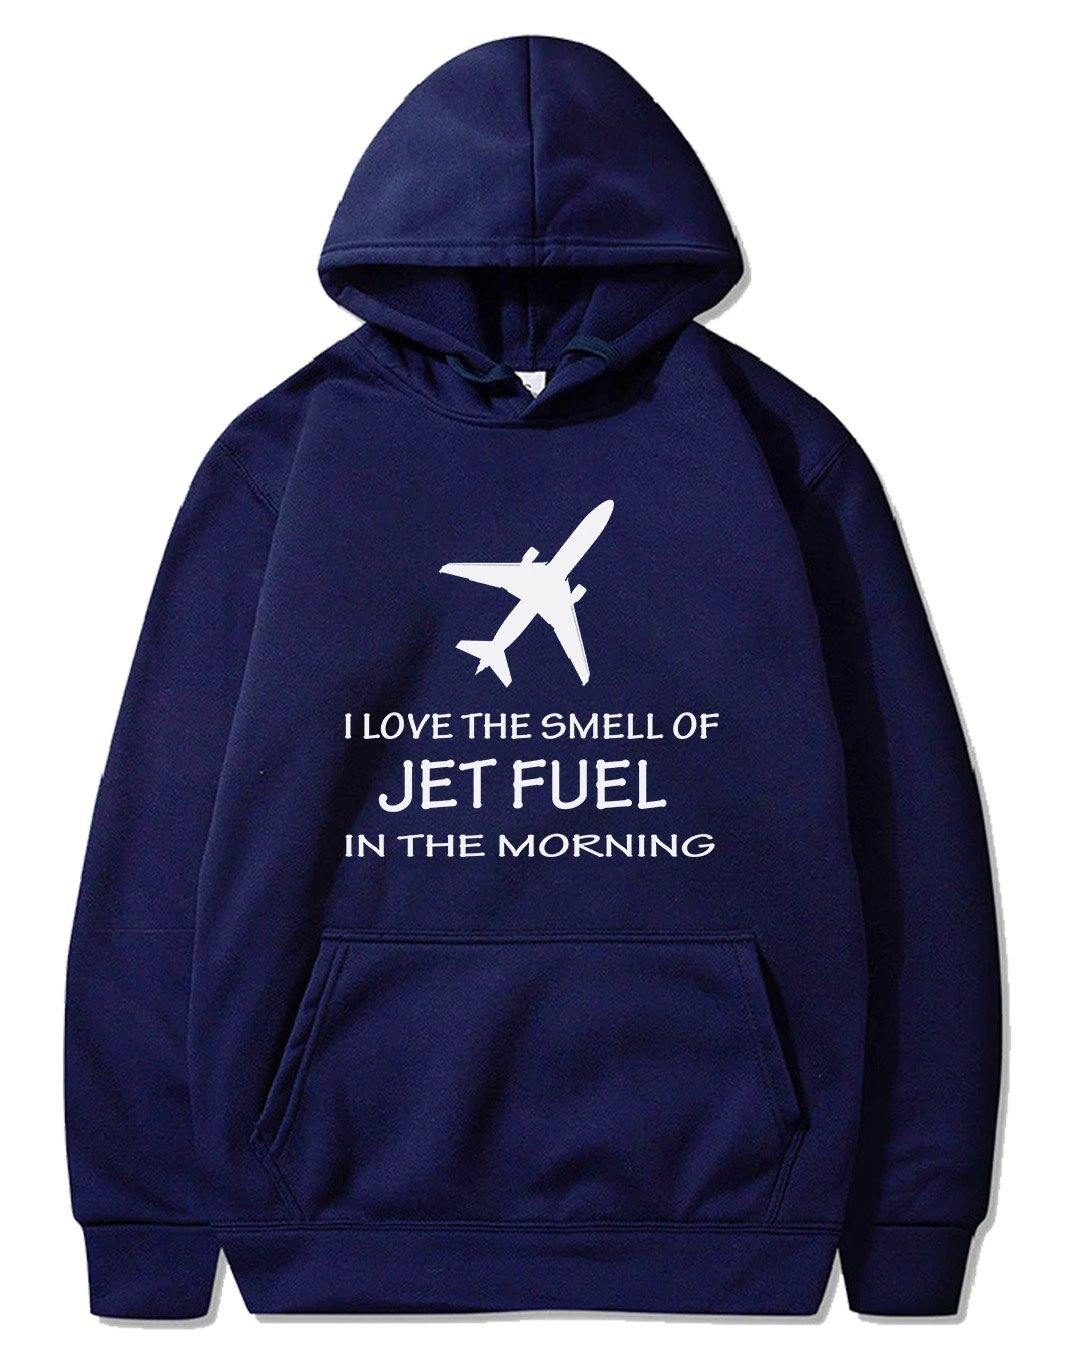 I LOVE THE SMELL OF JET FUEL IN THE MORNING PULLOVER THE AV8R